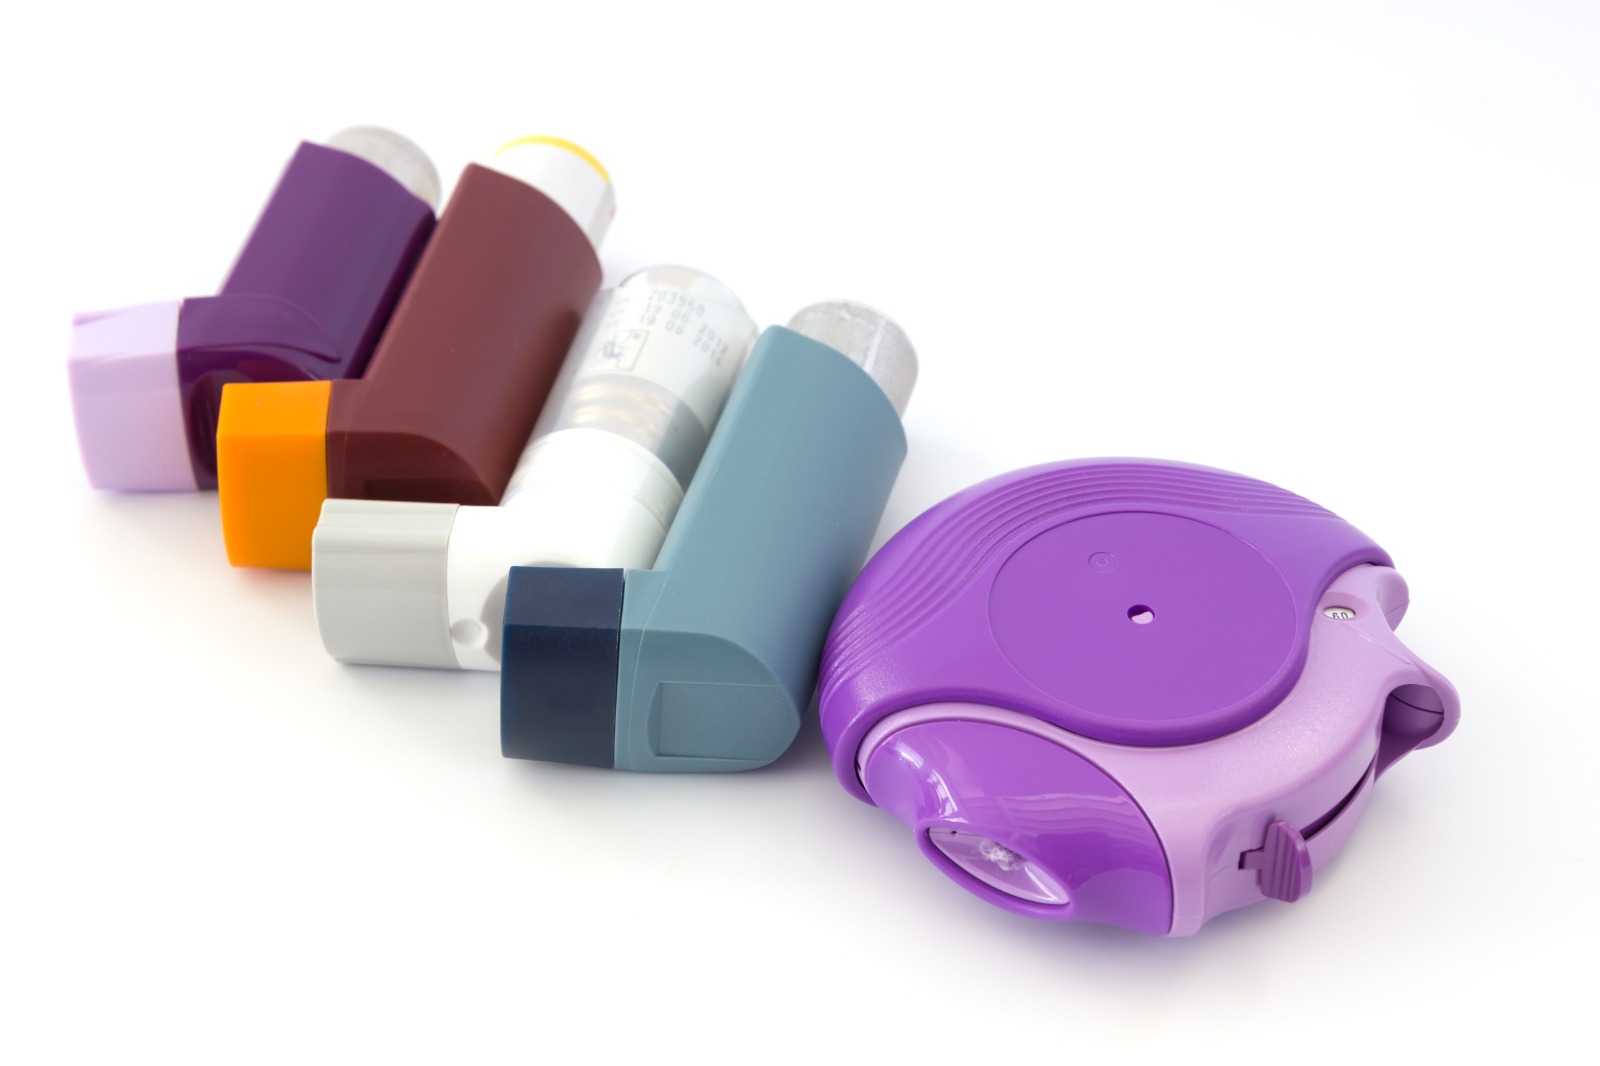 Asthma inhalers comparison: Ventolin, trimbow & other options